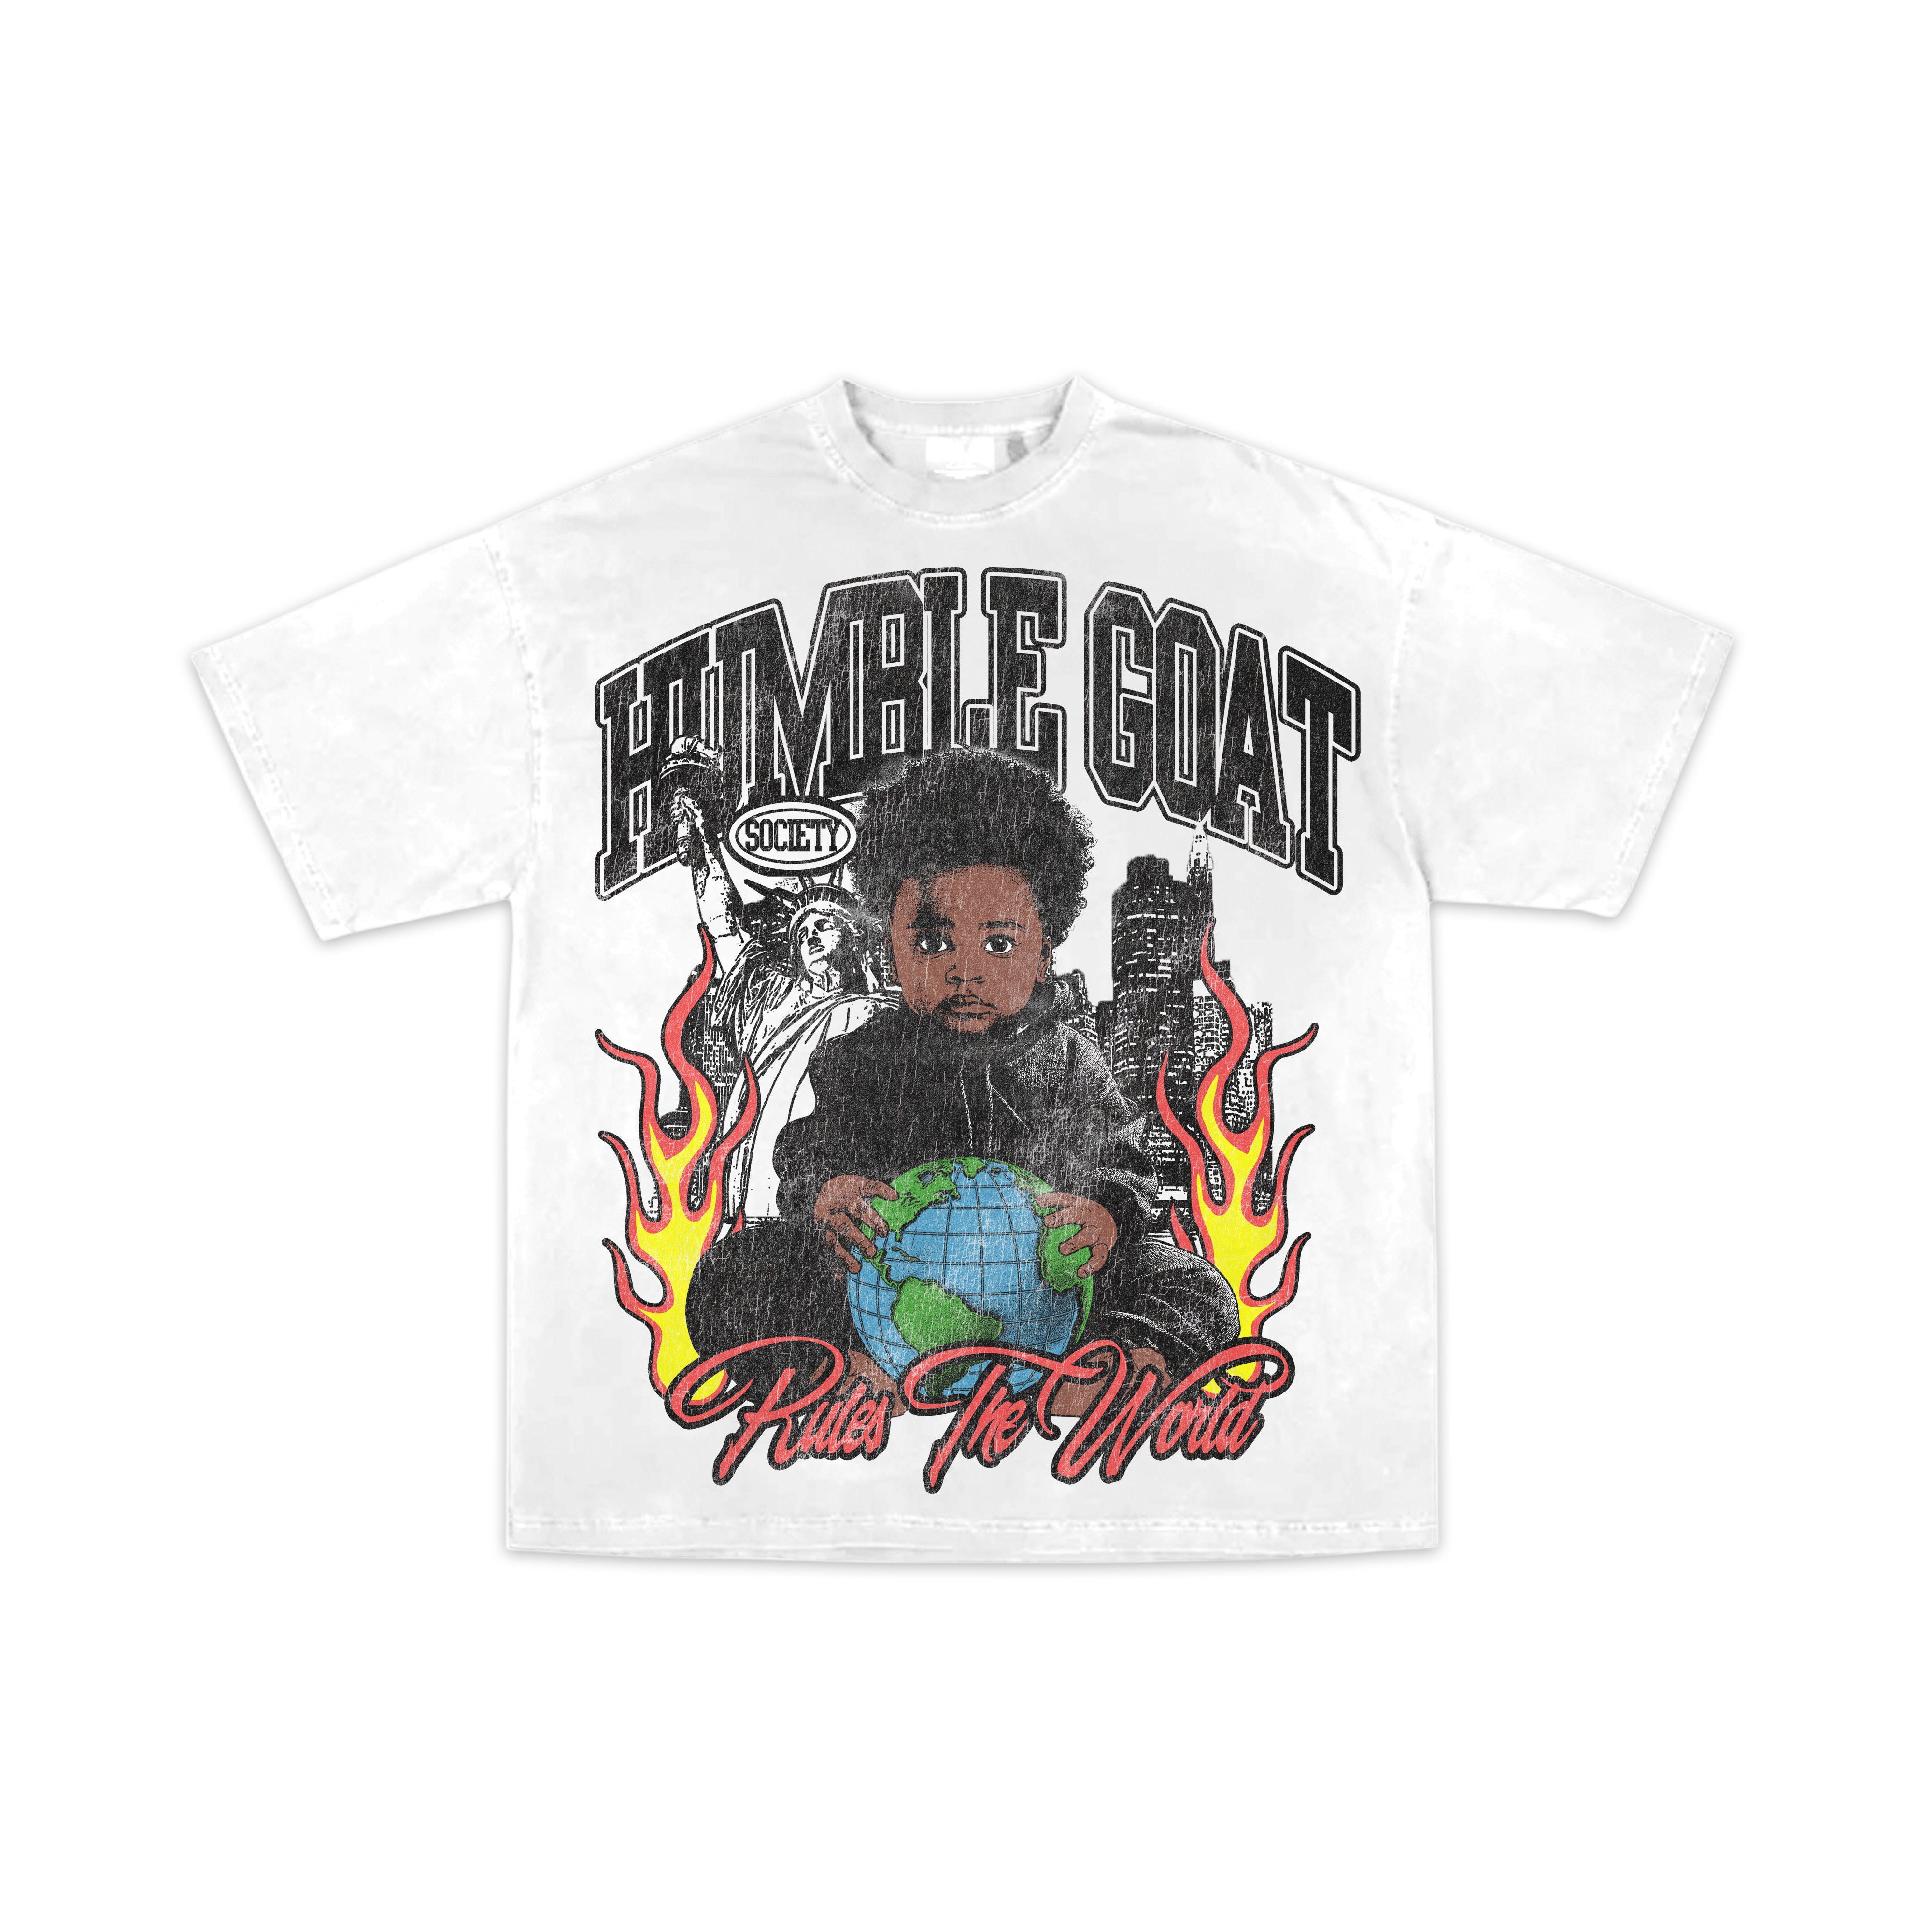 HUMBLE GOAT SOCIETY RULES THE WORLD TEE